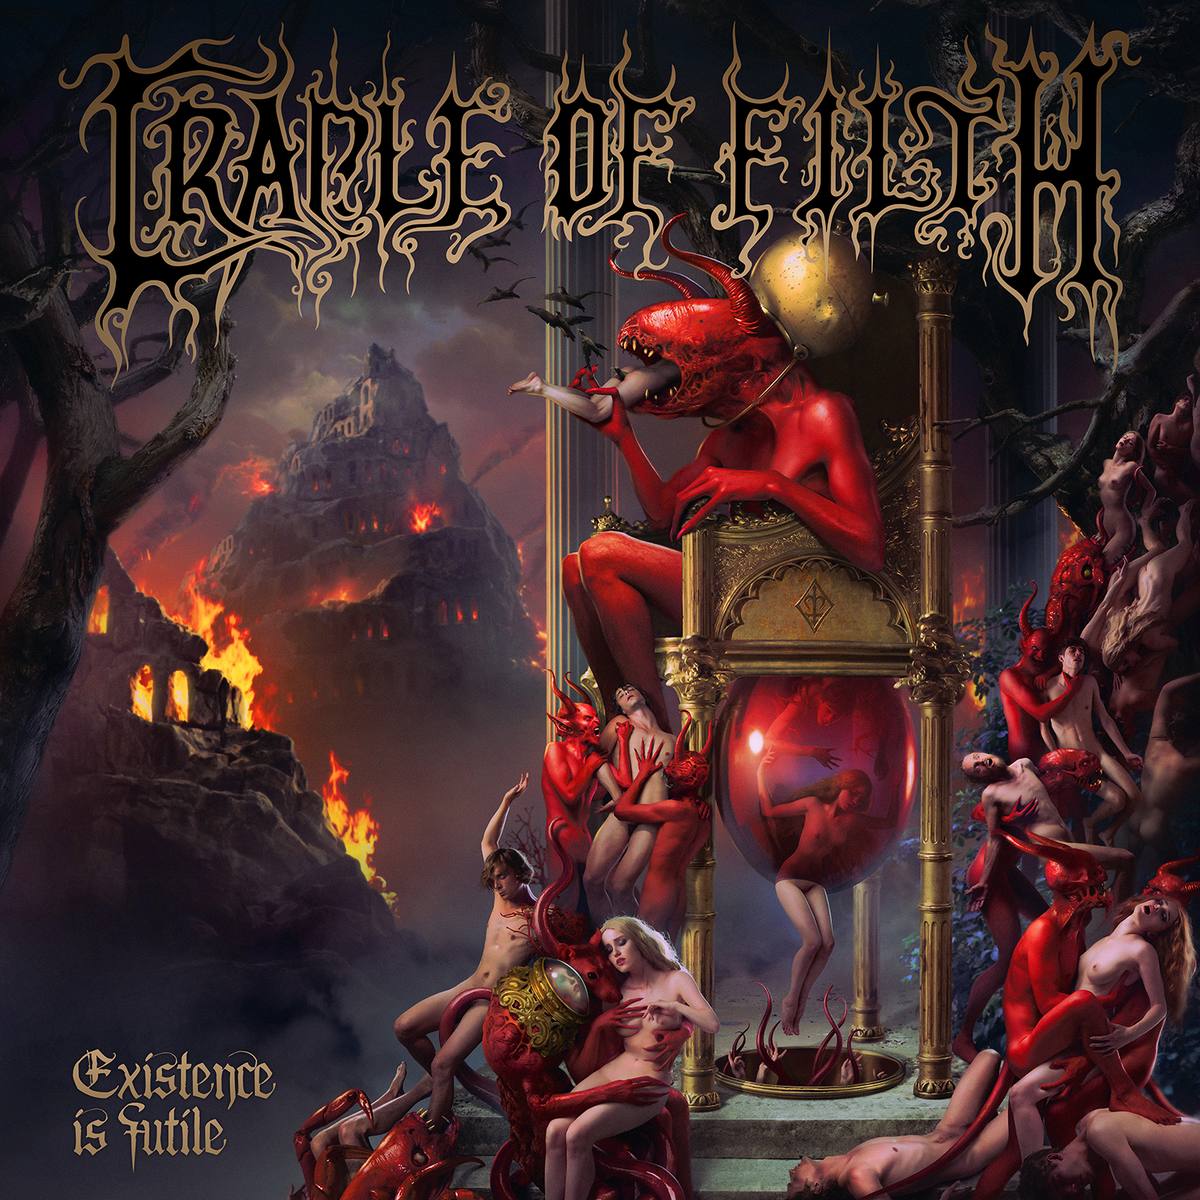 CRADLE OF FILTH RELEASE VIDEO FOR 'CRAWLING KING CHAOS'
musicextreme666.blogspot.com/2021/07/cradle…
@CradleofFilth @nuclearblast

#cradleoffilth #metal #blackmetal #symphonicblackmetal #uk #unitedkingdom #musicextreme #music #art #band #newmusic RT